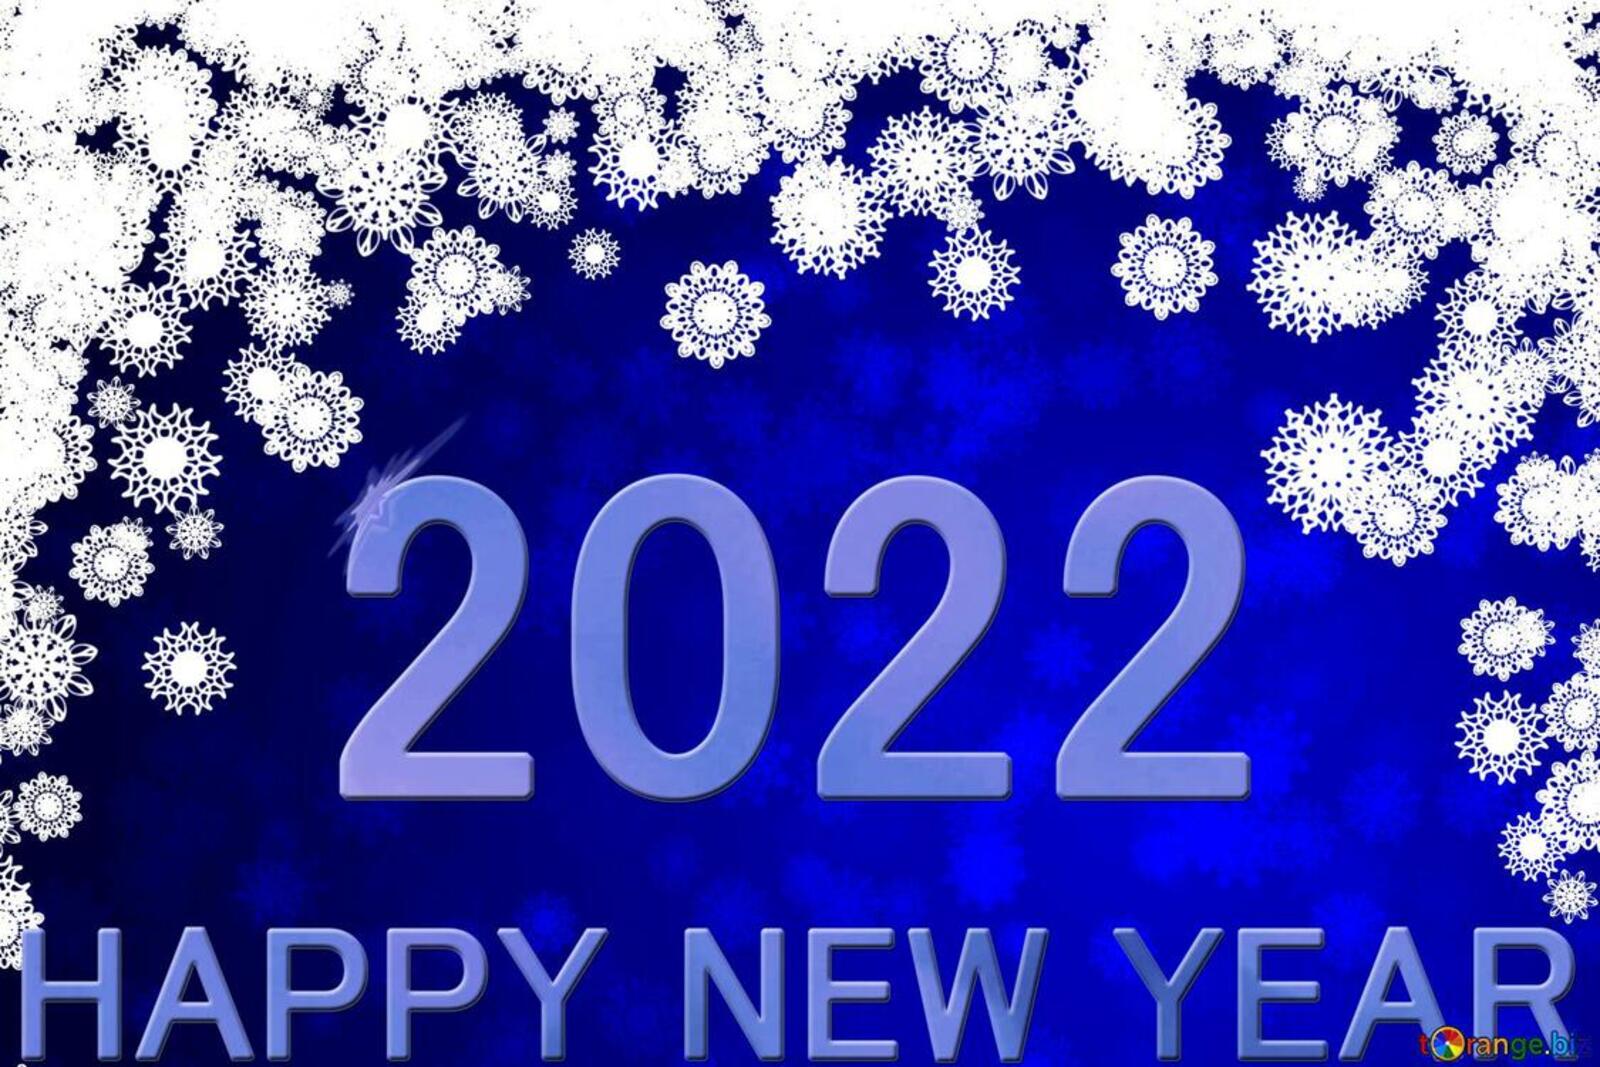 Wallpapers 2022 snowflakes new year 2022 on the desktop